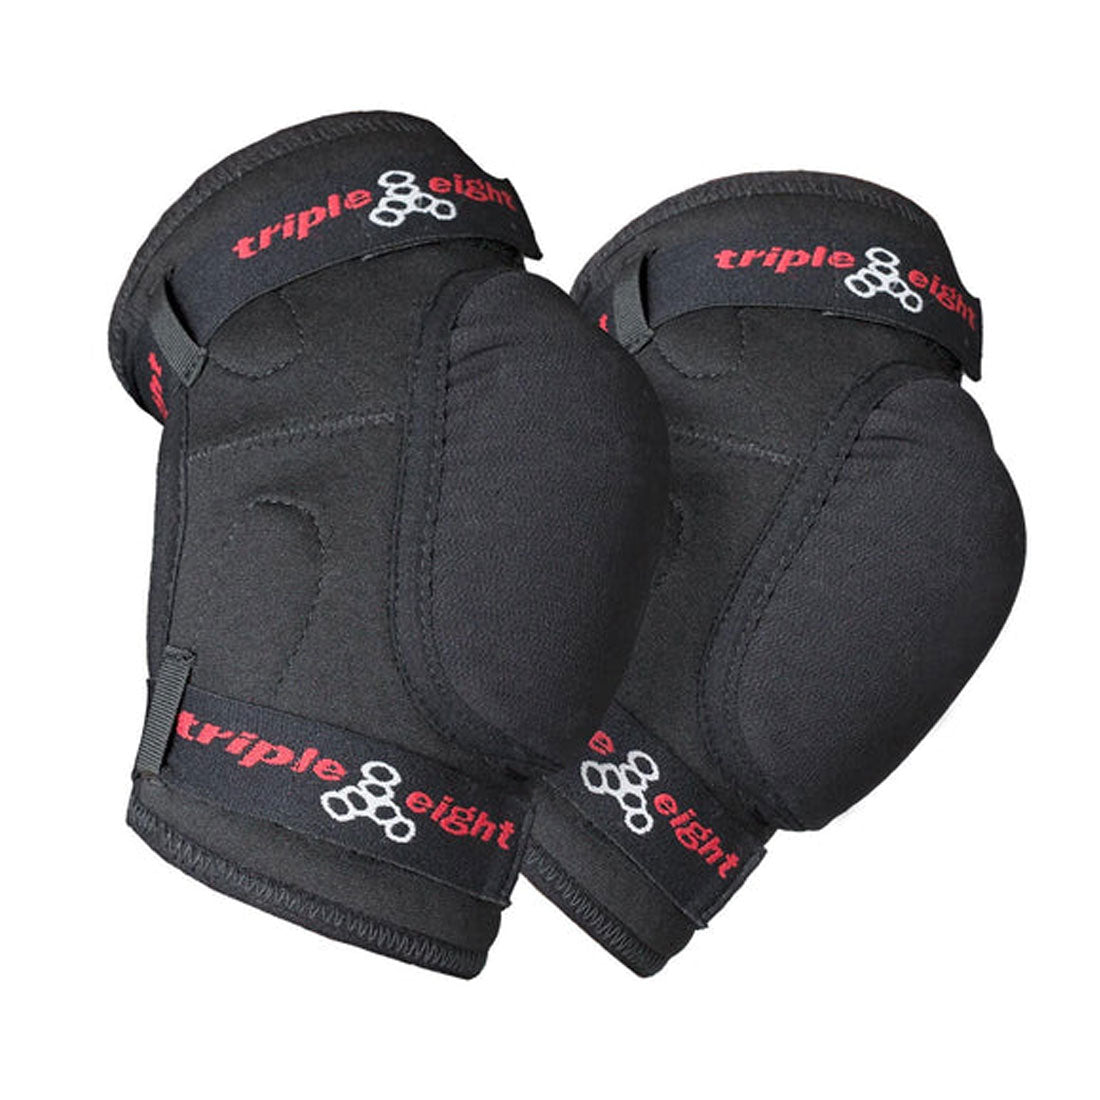 Triple 8 Stealth Hardcap Elbow Pads Protective Gear